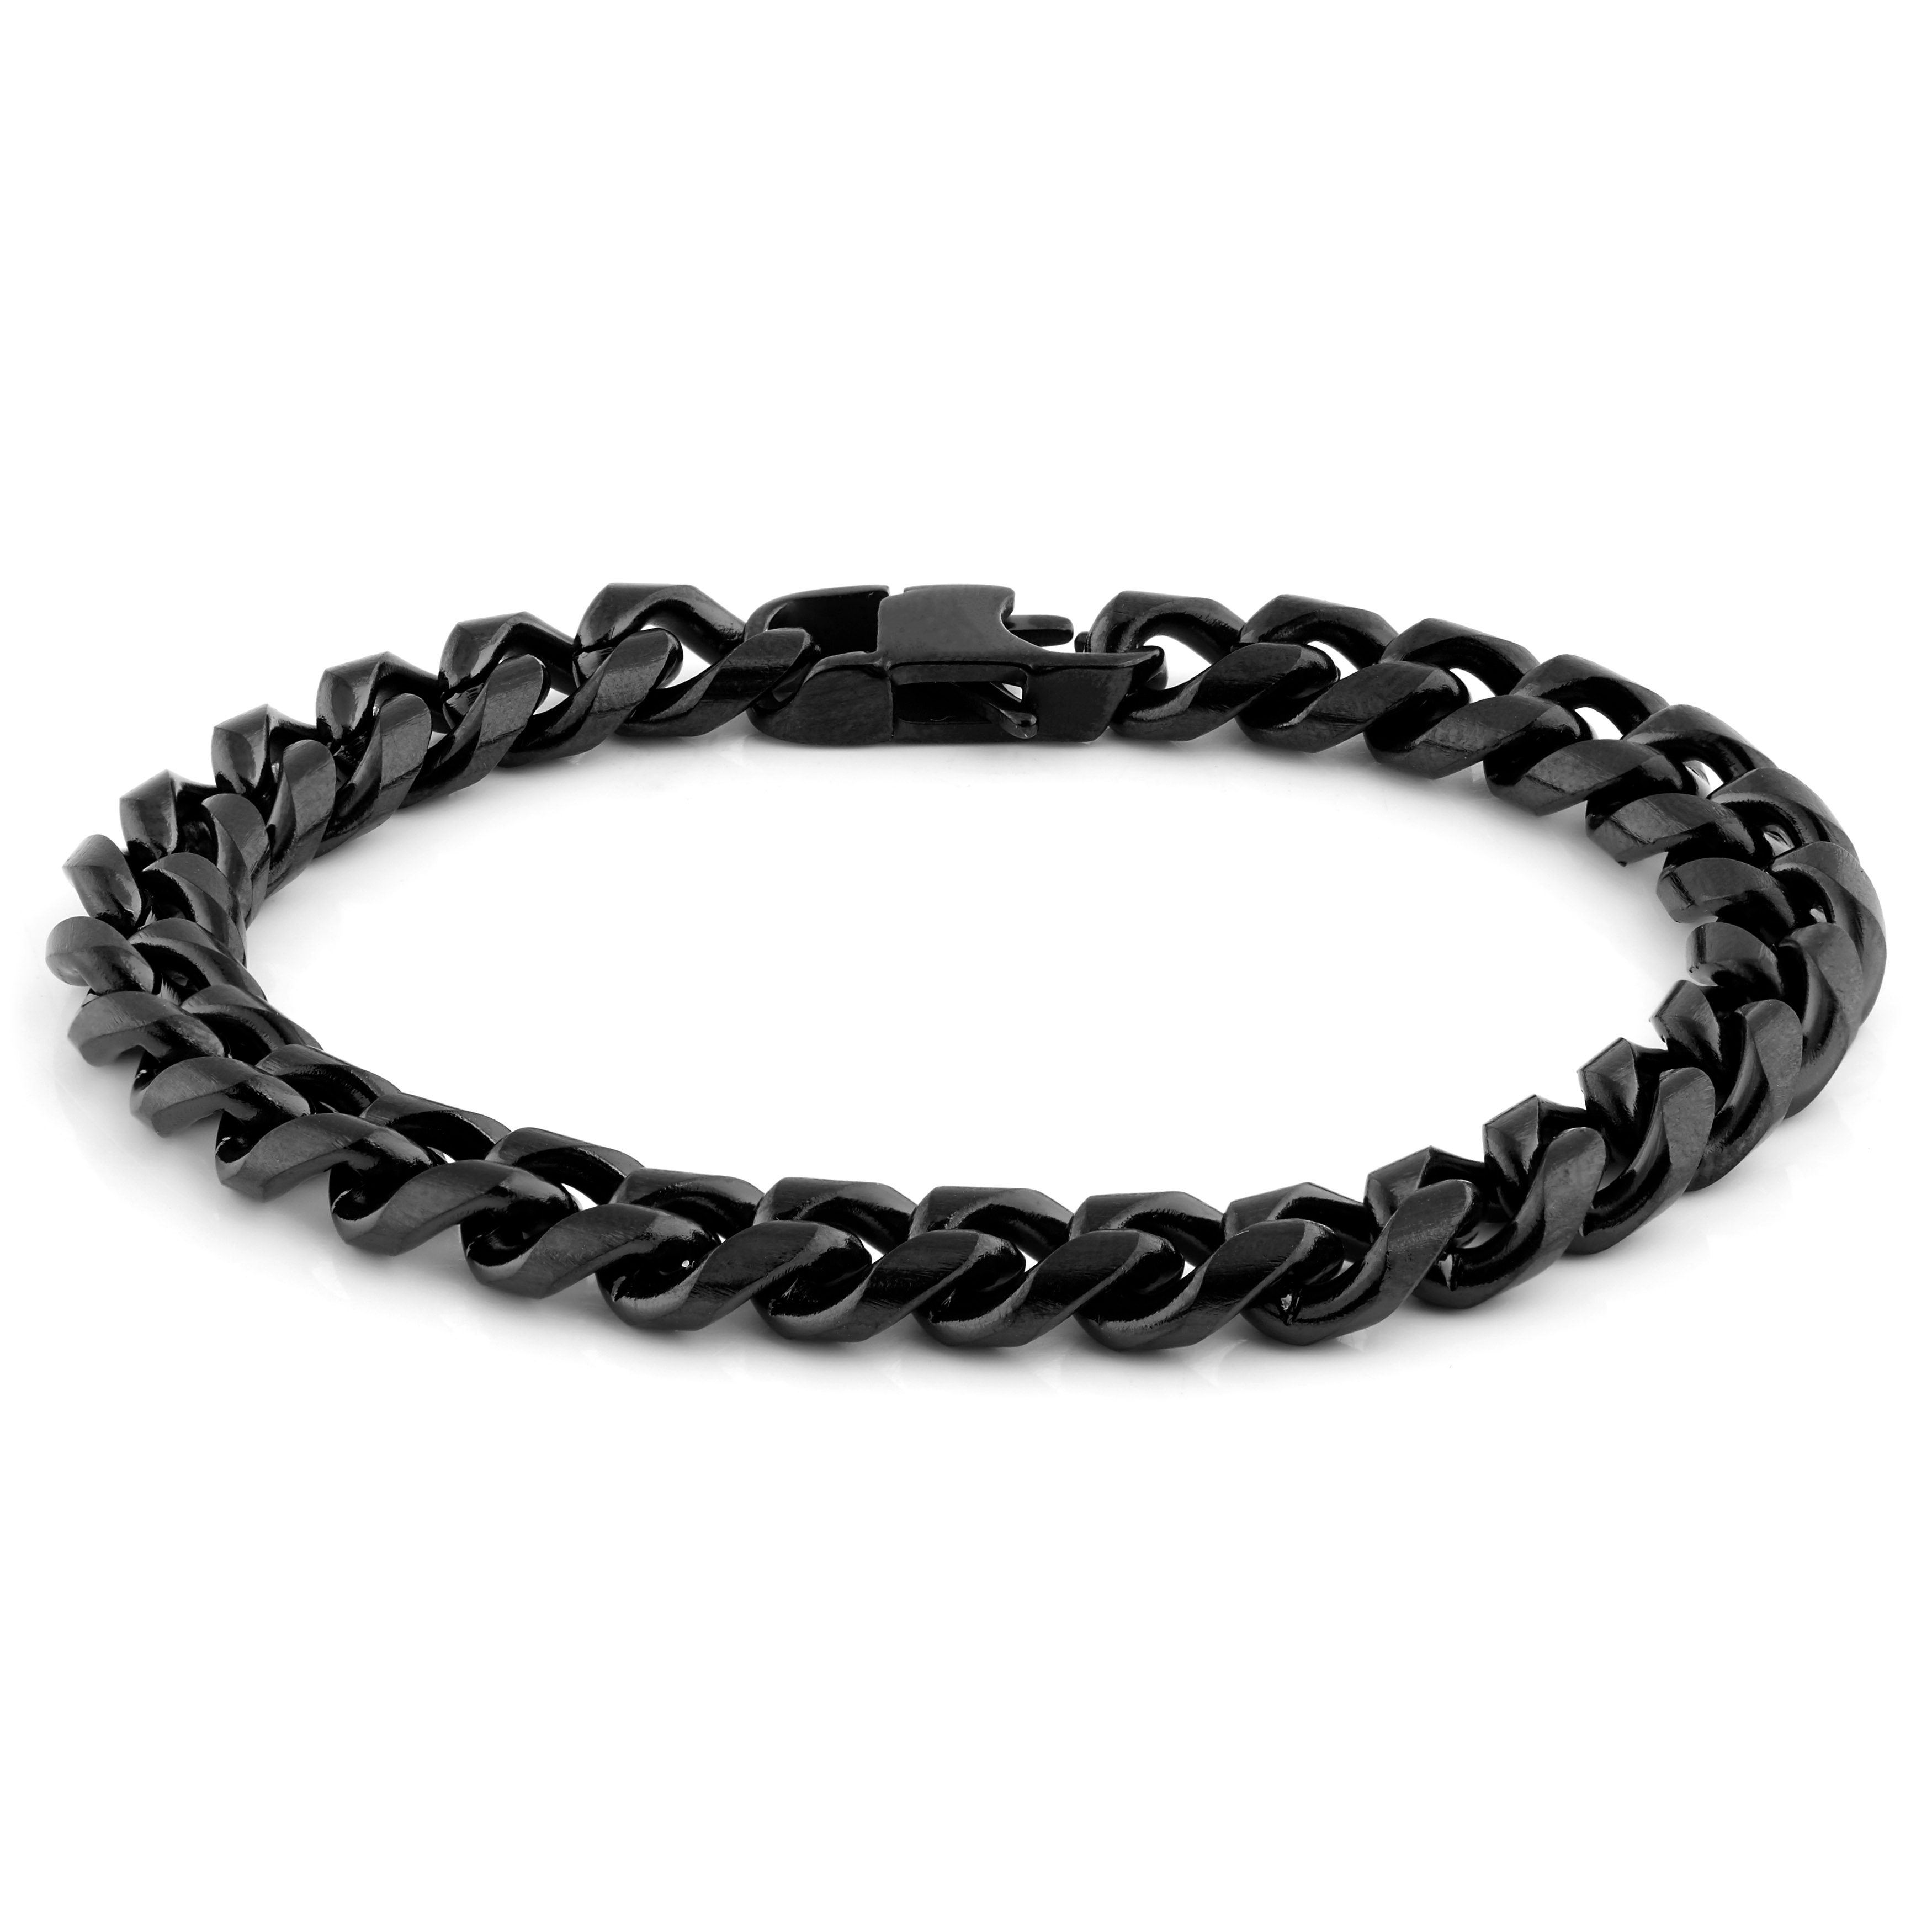 Men's leather bracelet with metal cables and magnetic steel biker clasp